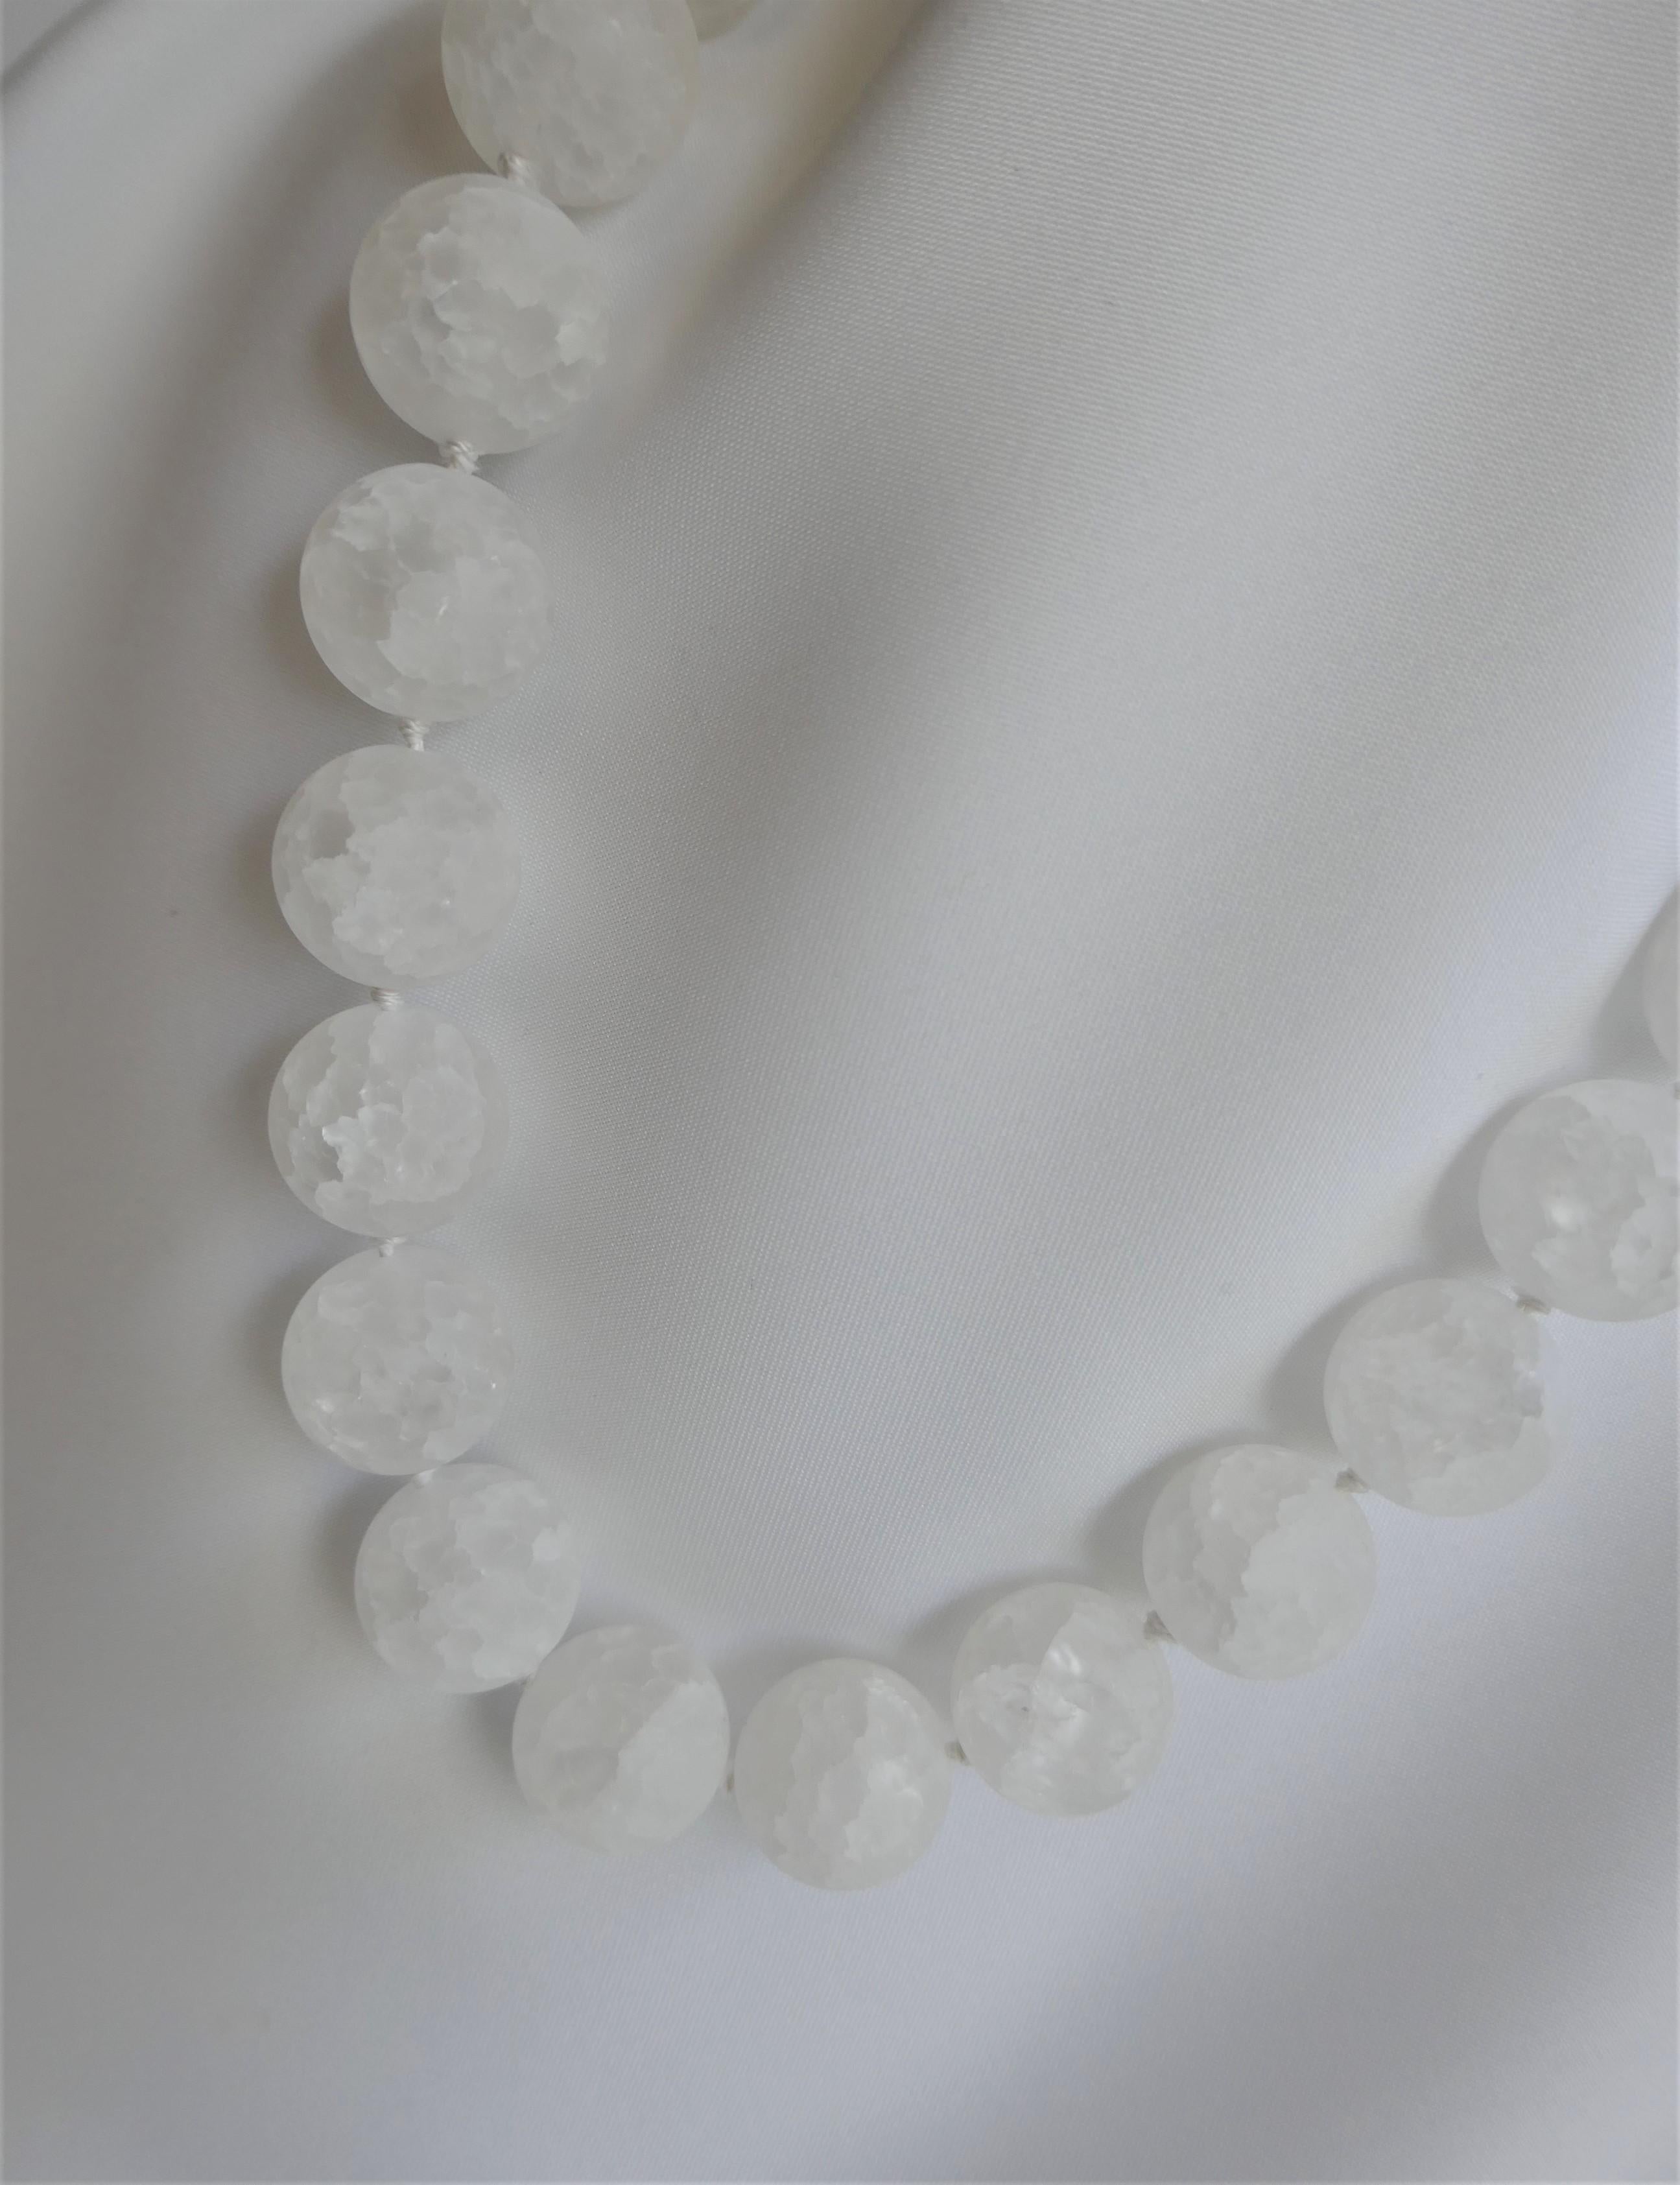 The photos do not capture the beauty of  this necklace. I love matted cracked rock crystal specially the large beads. Its a necklace that can be worn year round and looks great on. The rock crystal is 18mm, individually knotted on white silk thread